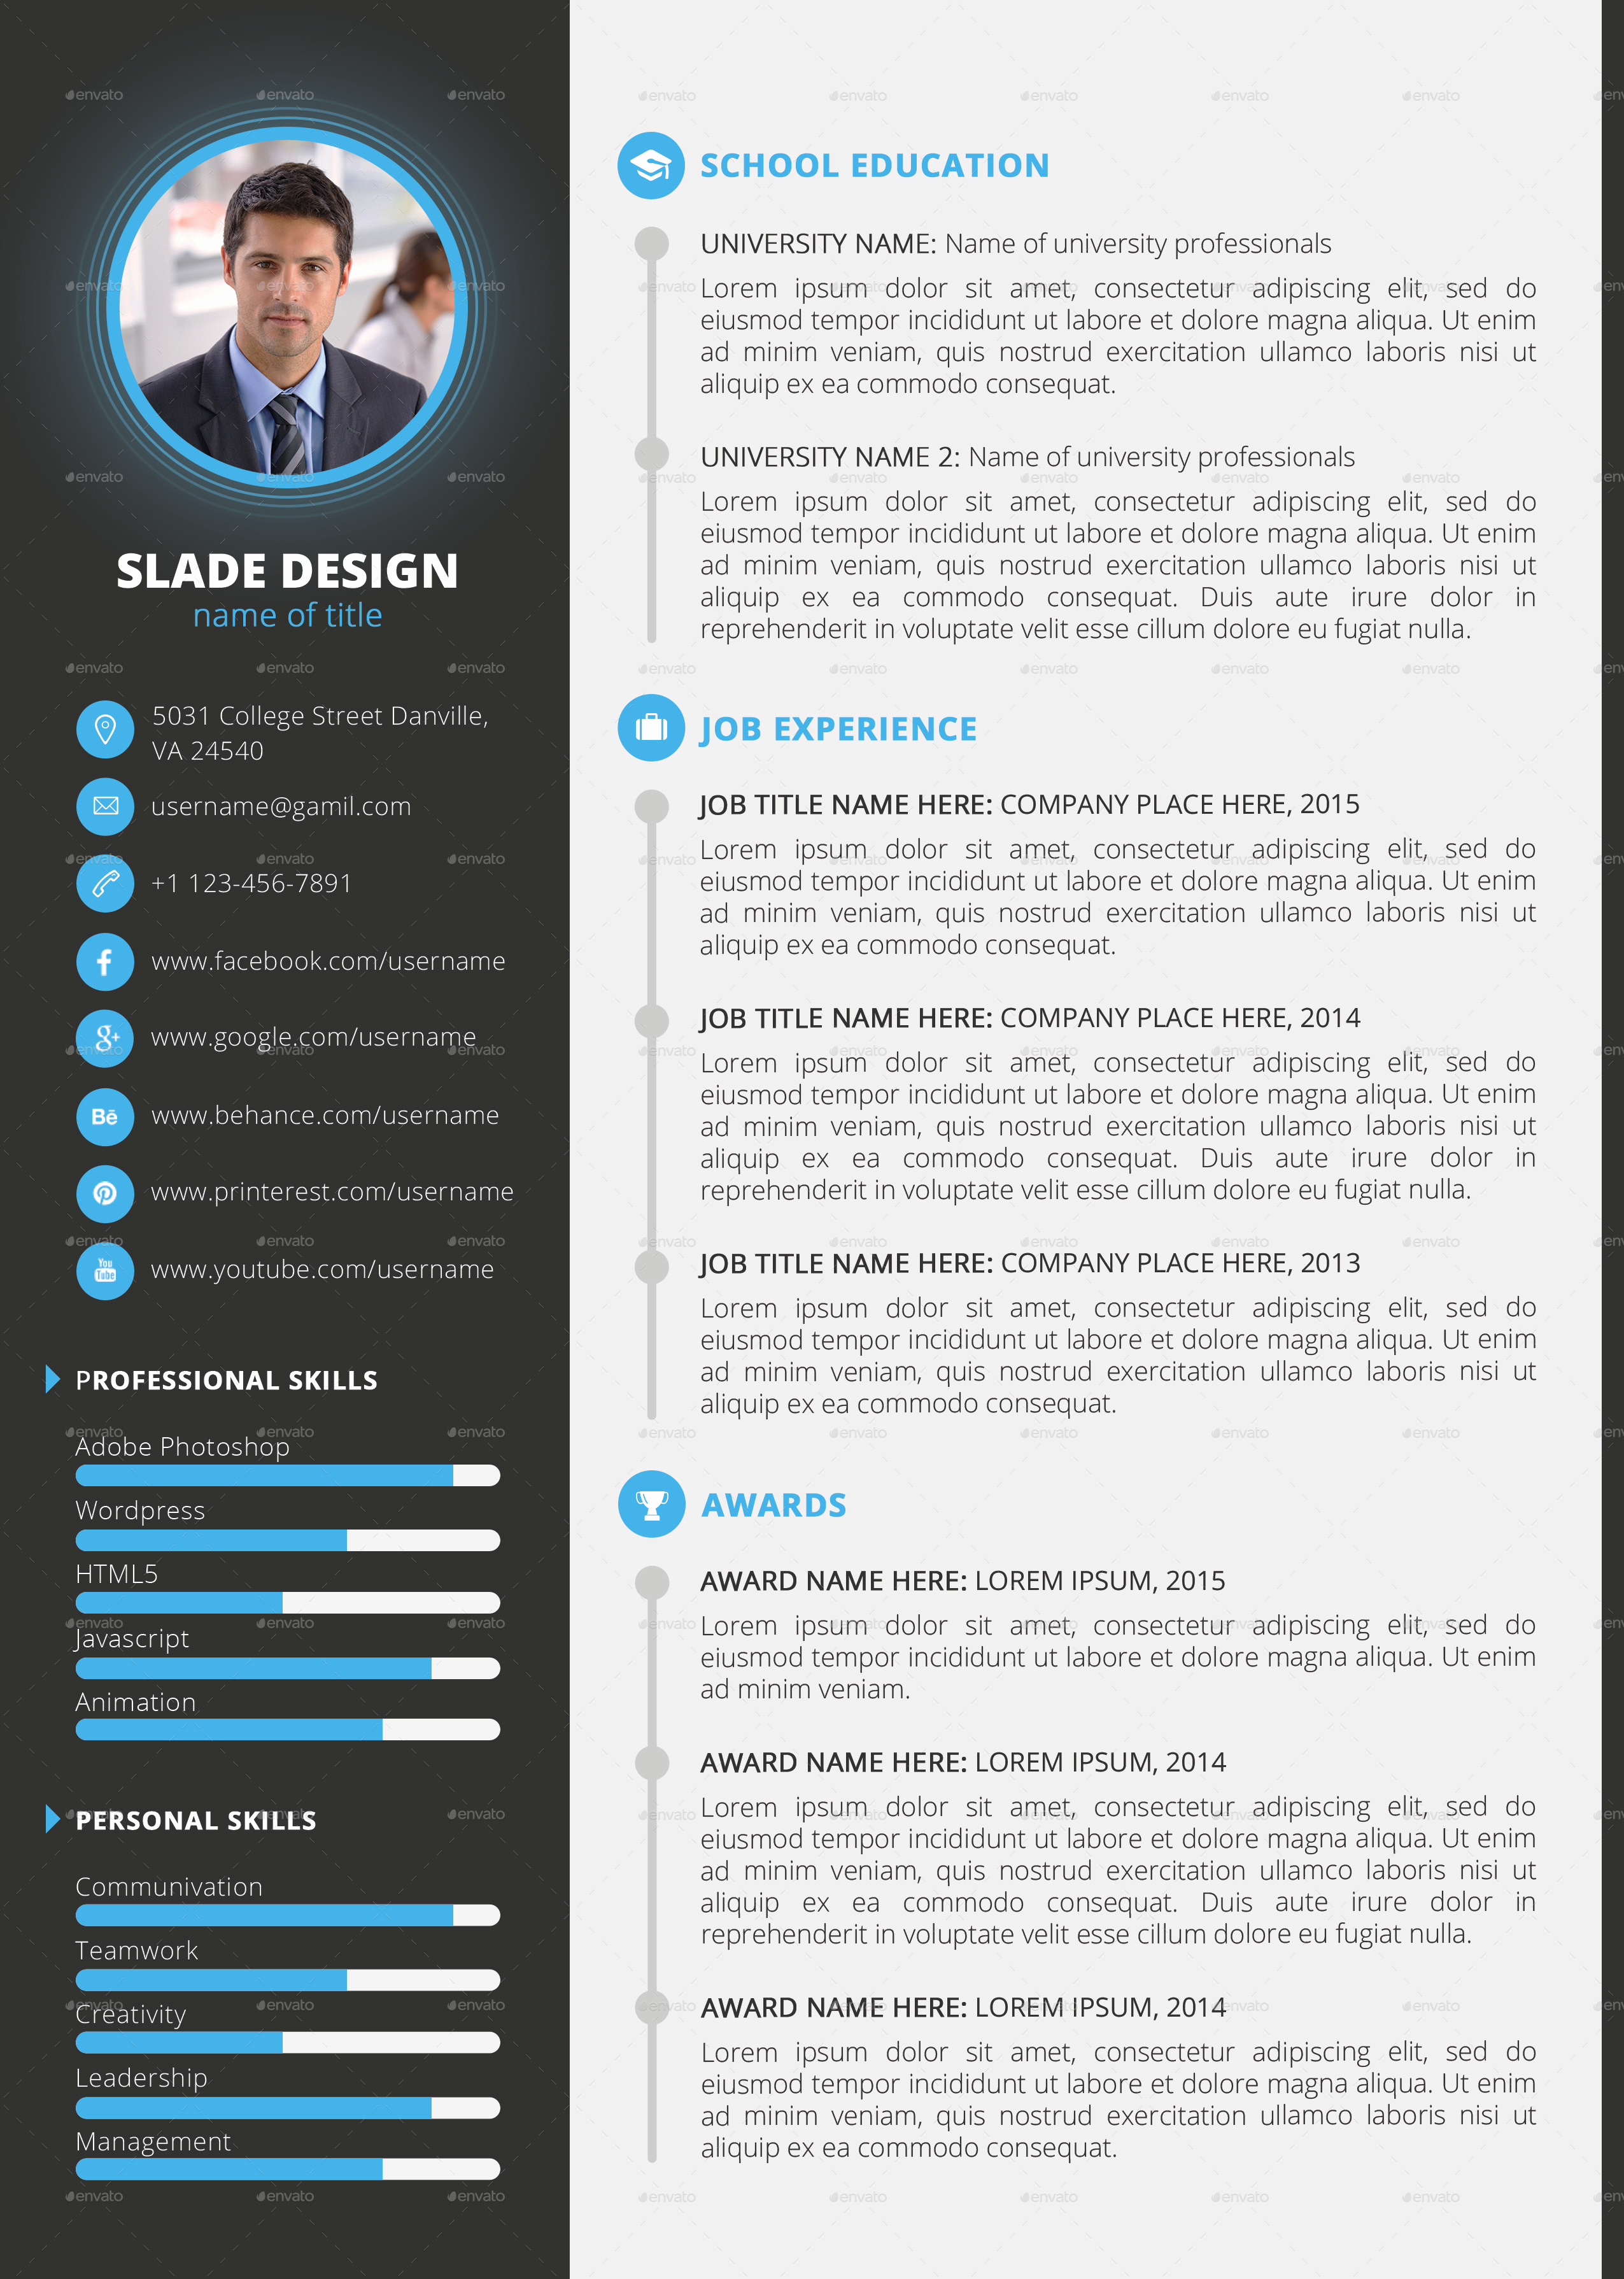 Resume Template with Photo Elegant Slade Professional Quality Cv Resume Template by